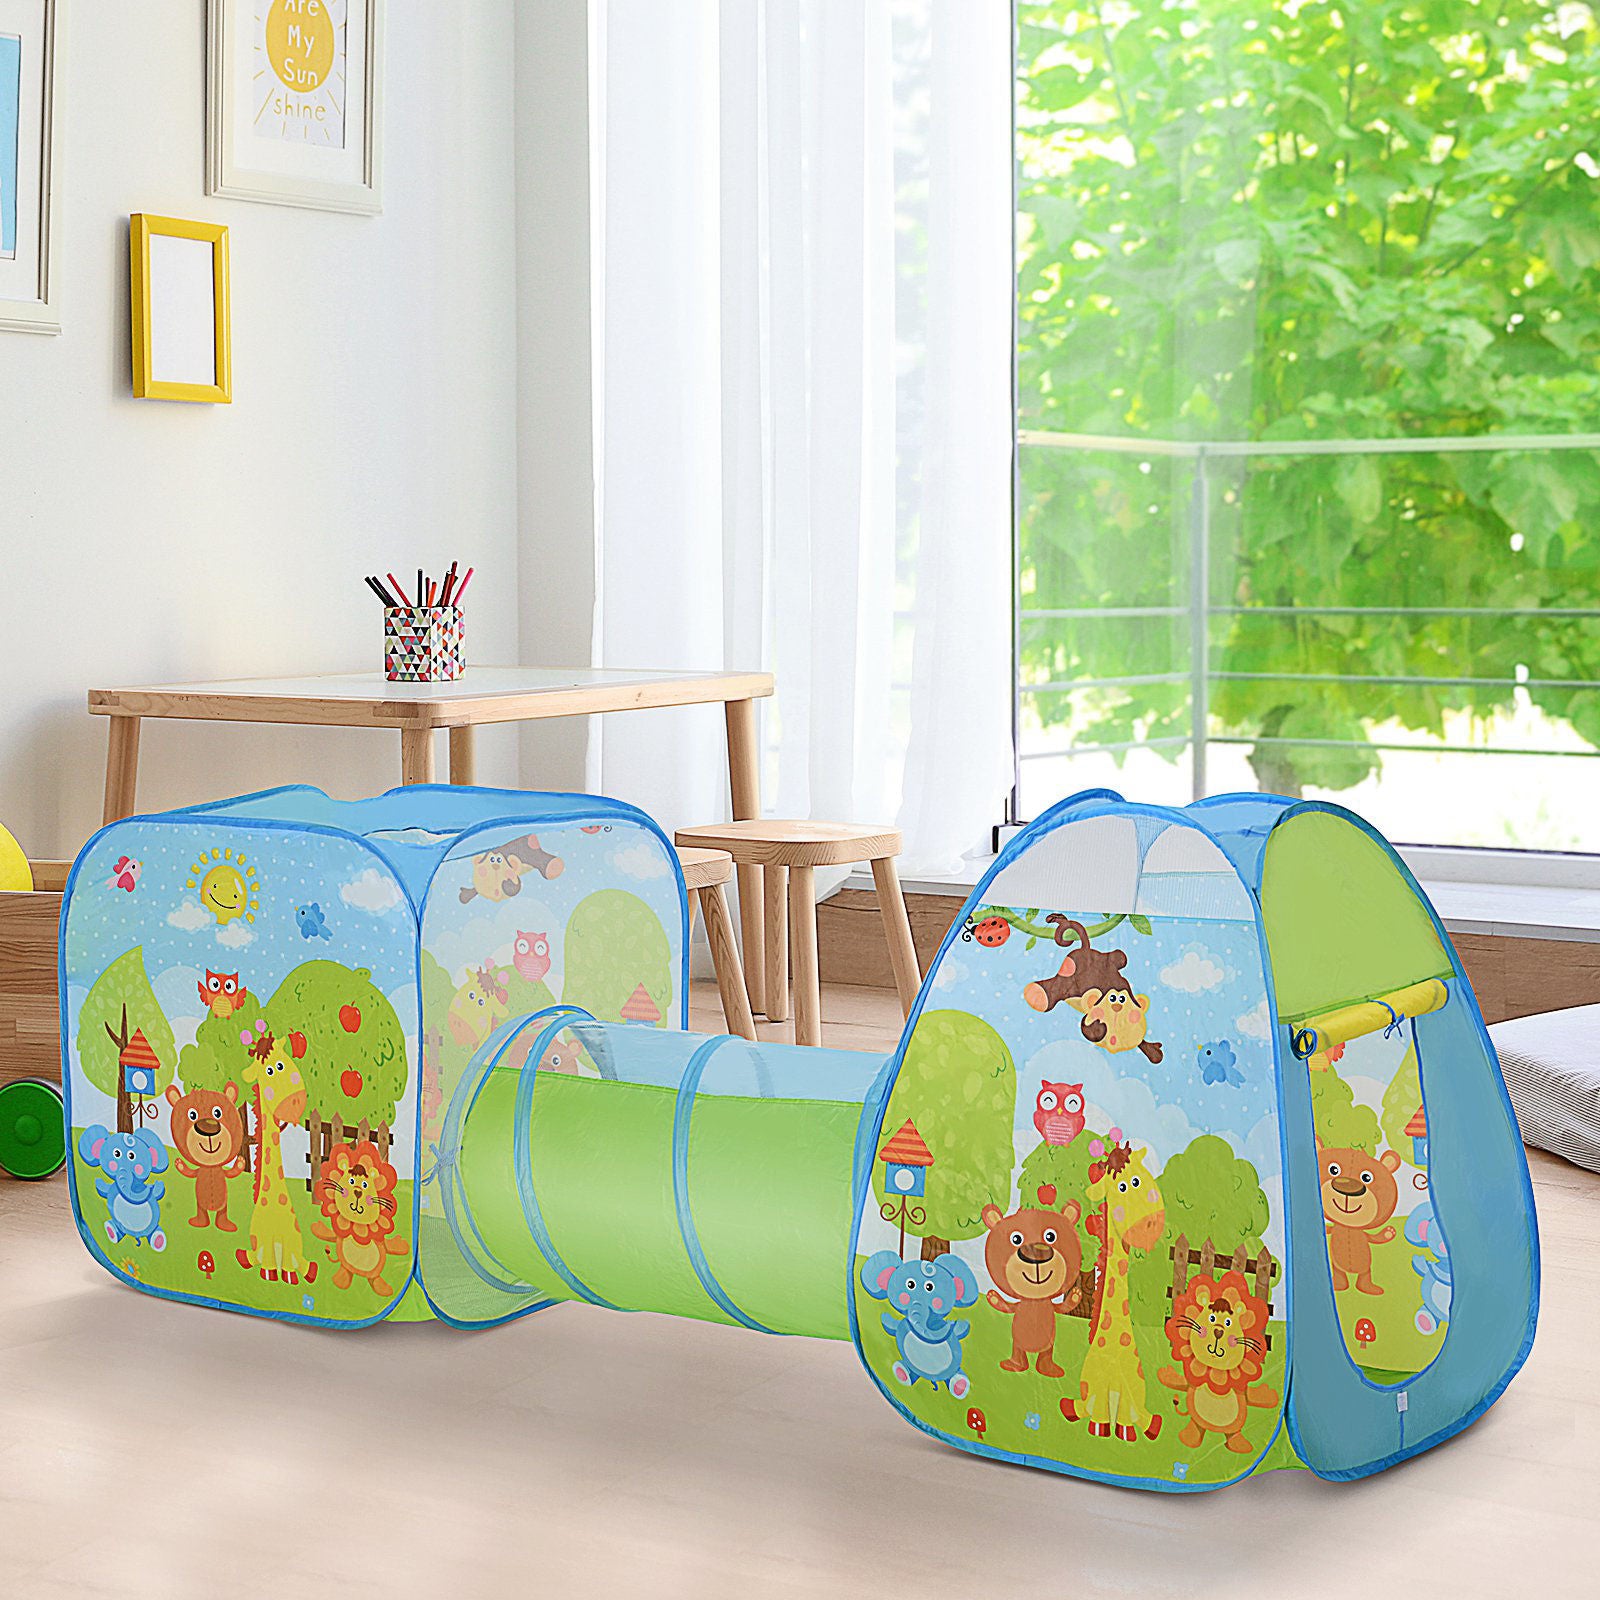 Nancy's Andys Cove Kinderspeeltent - Groen - Polyester, Staal - 90,55 cm x 29,13 cm x 36,61 cm